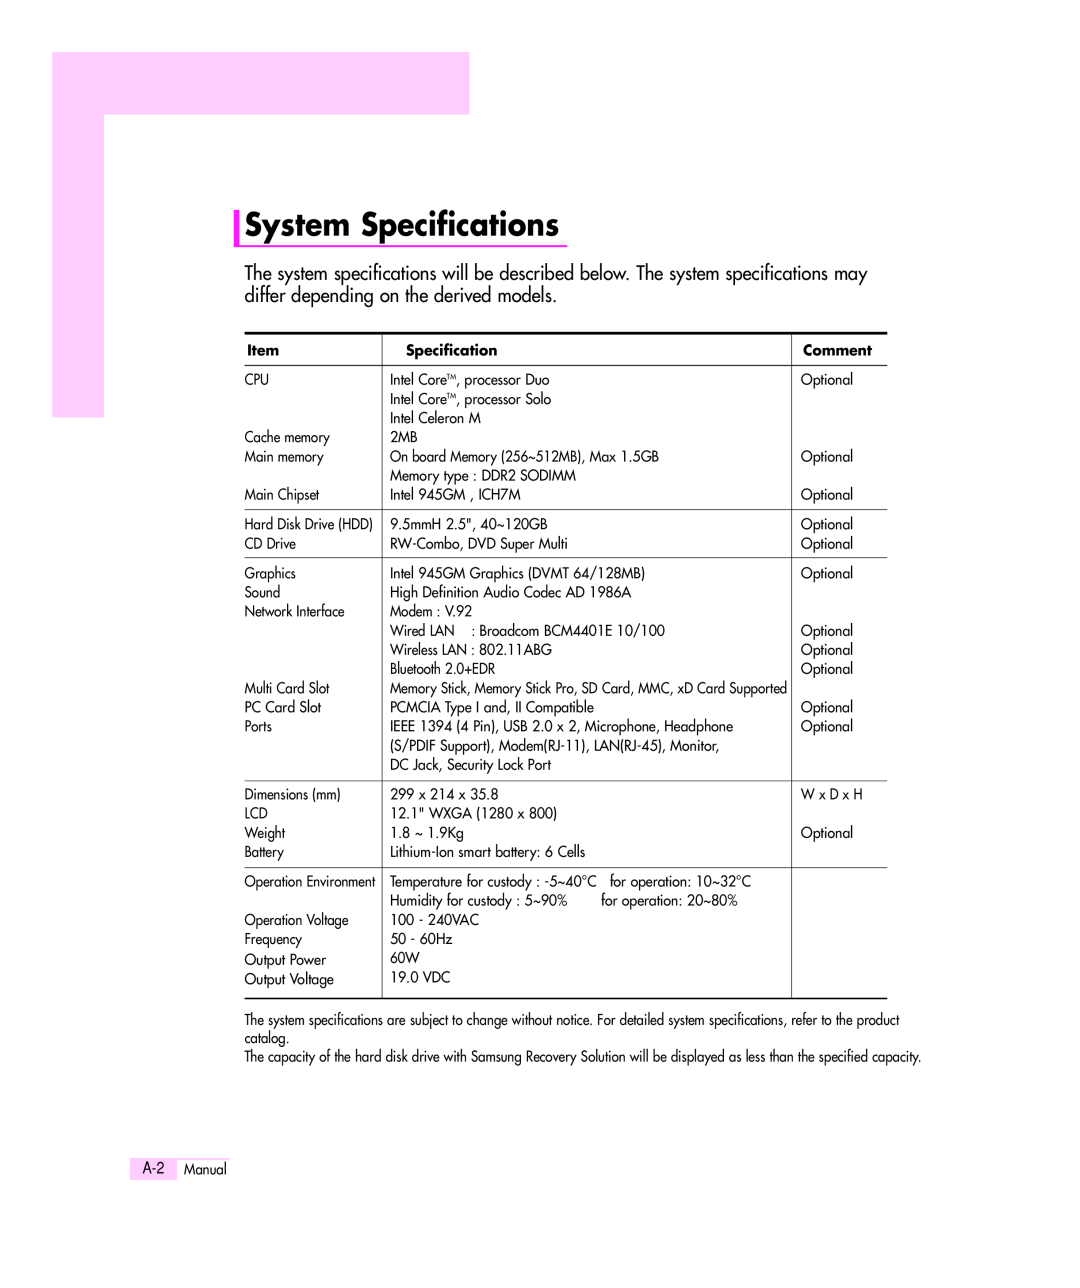 Samsung Q35 manual System Specifications, Comment 